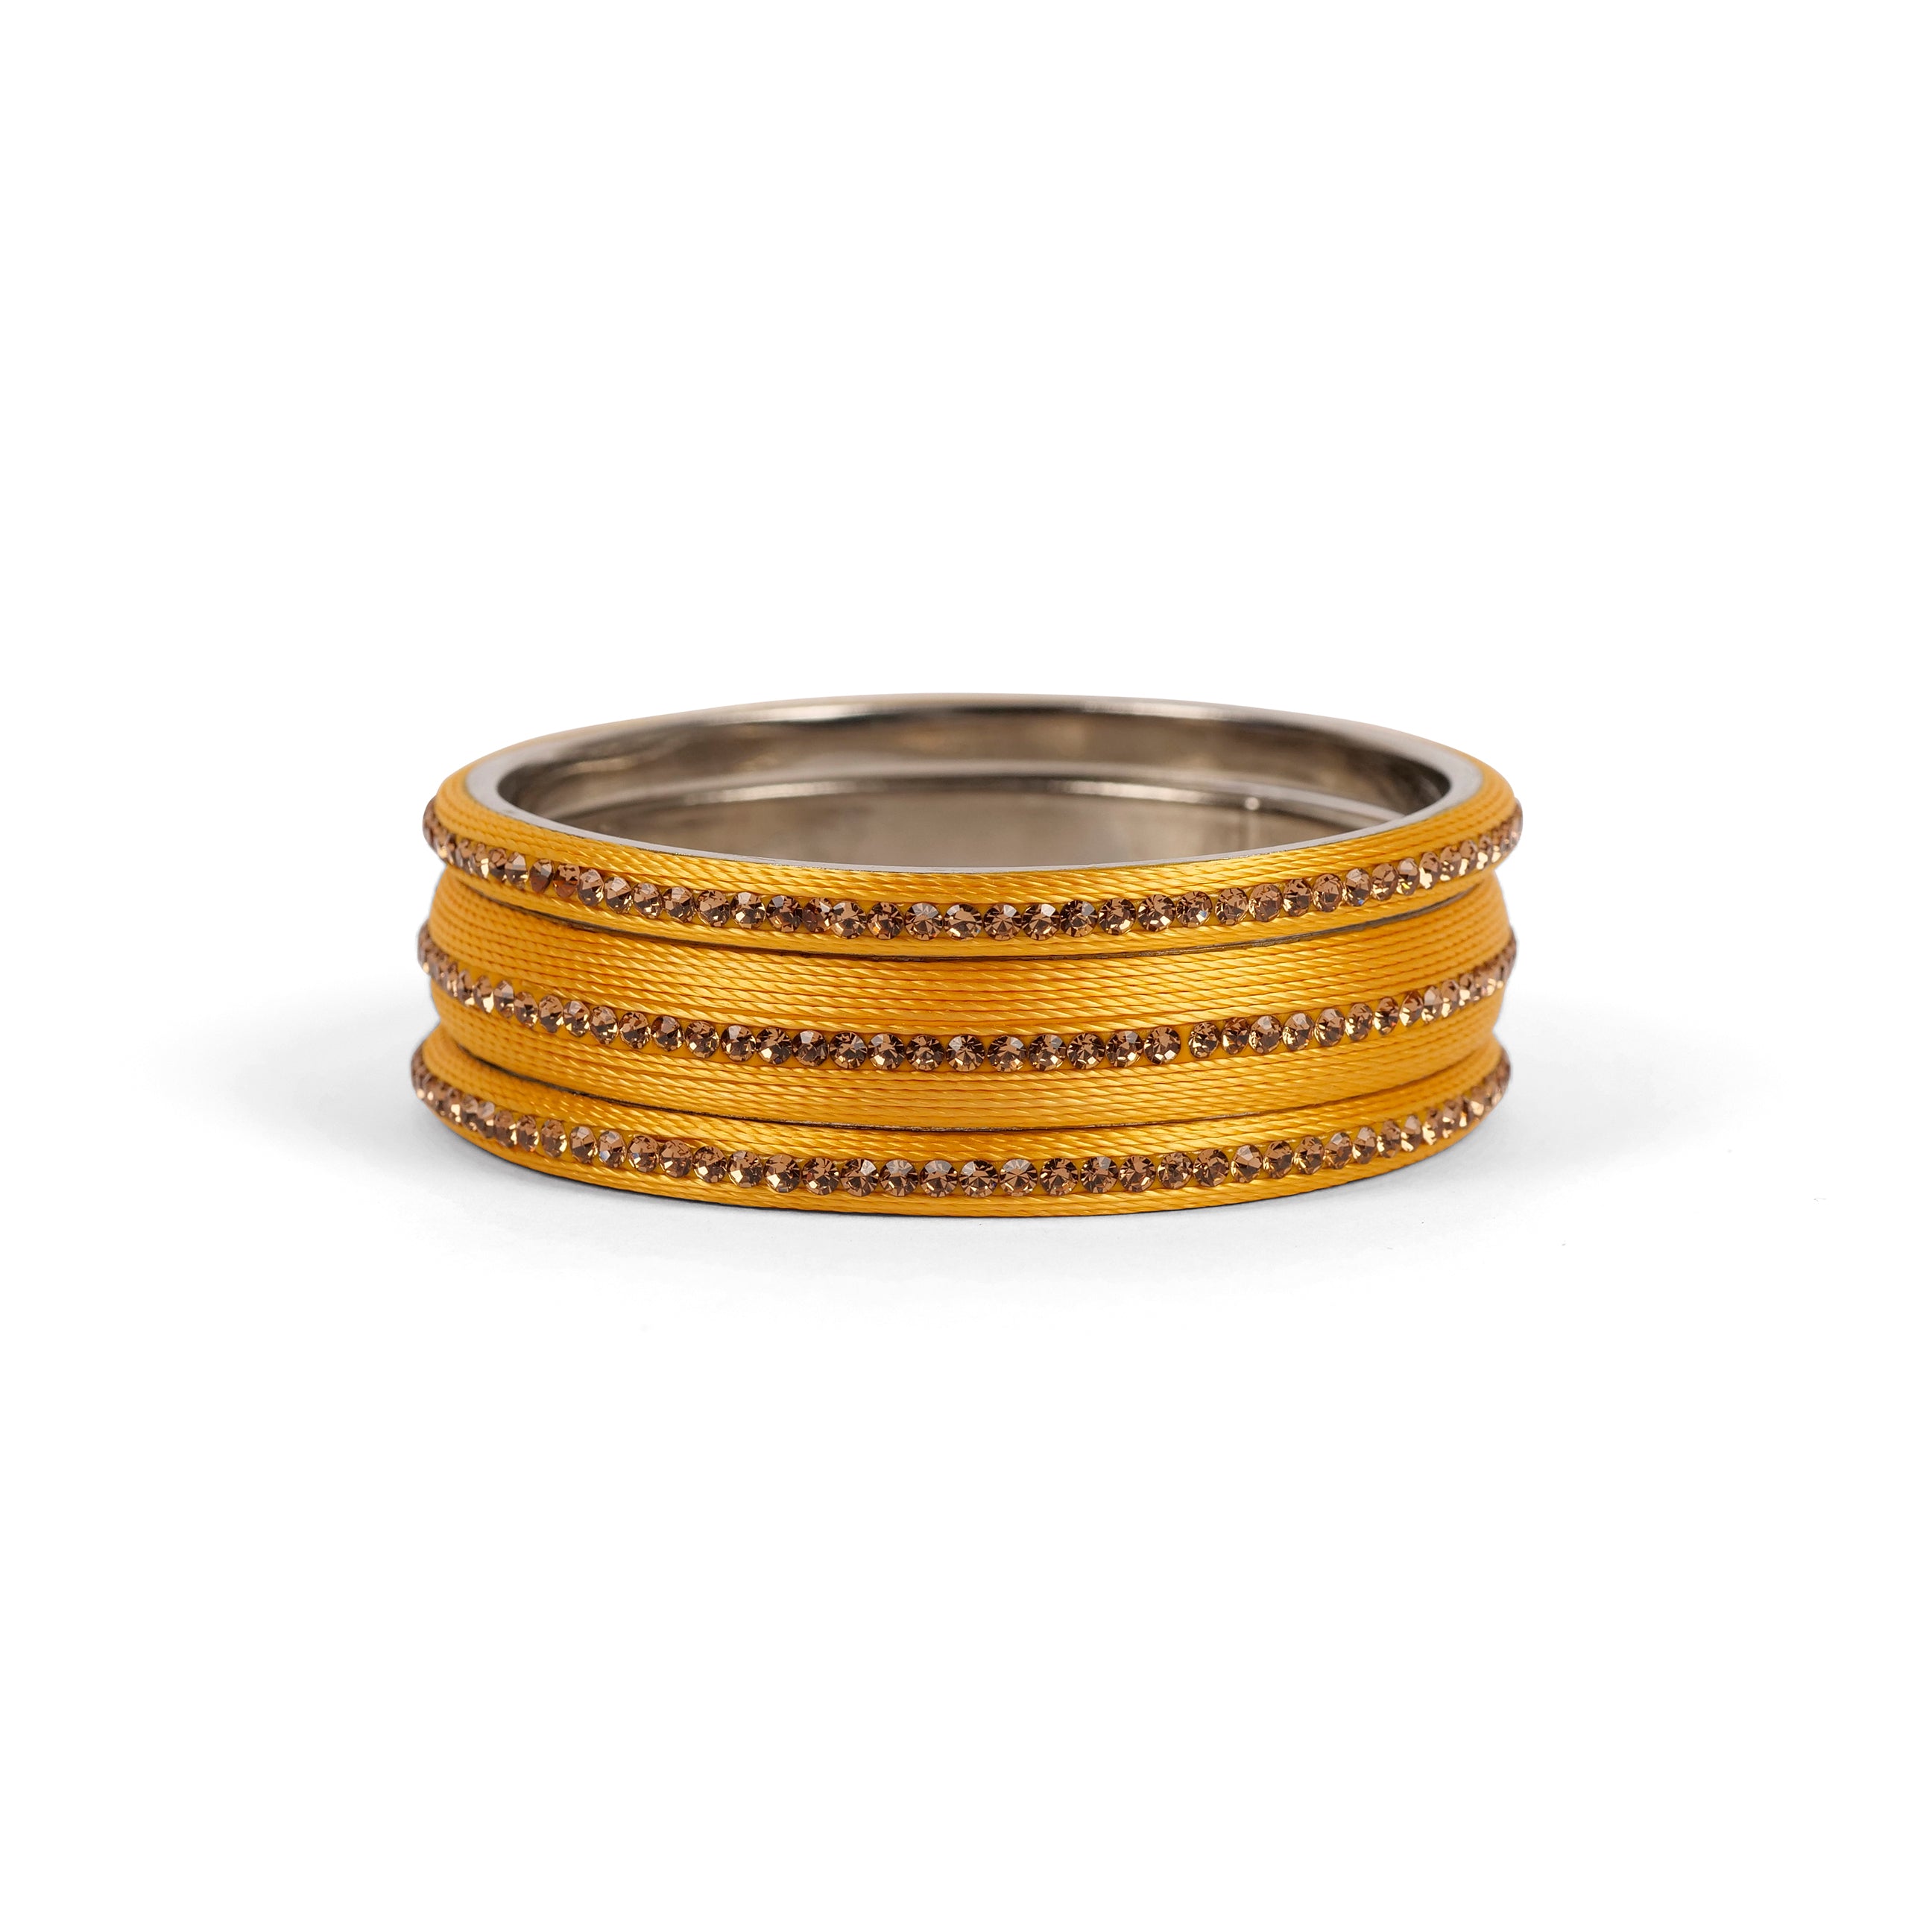 Set of 3 Thread Bangles in Yellow